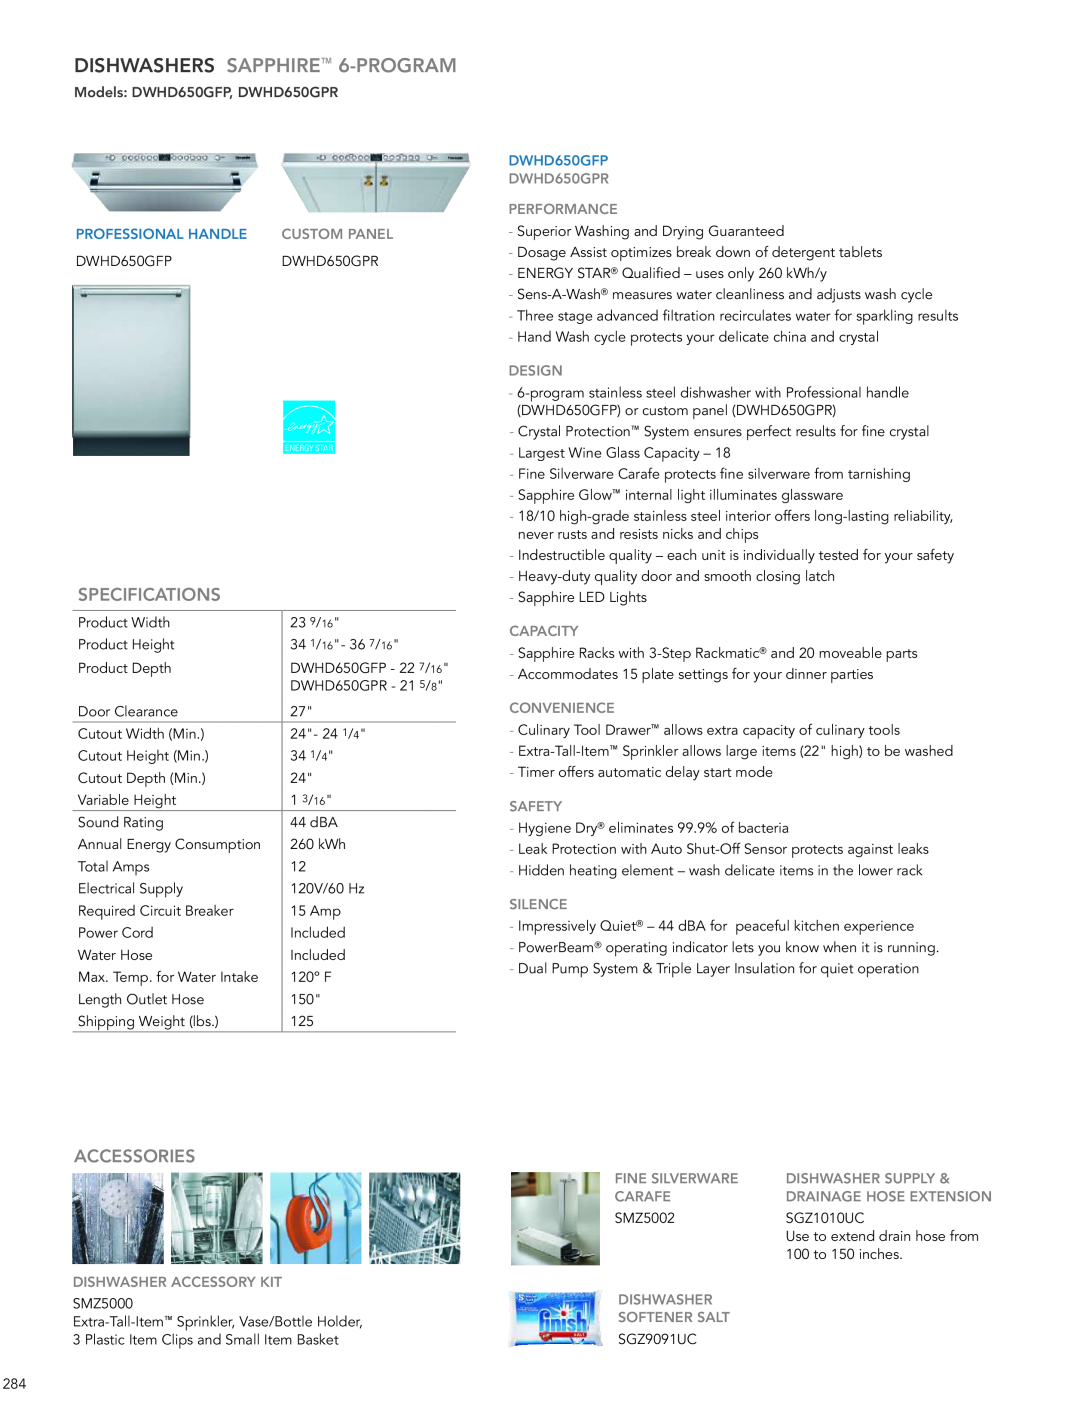 Thermador DWHD651GFP manual DISHWASHERS SAPPHIRE 6-PROGRAM, Models DWHD650GFP, DWHD650GPR, Specifications, Accessories 